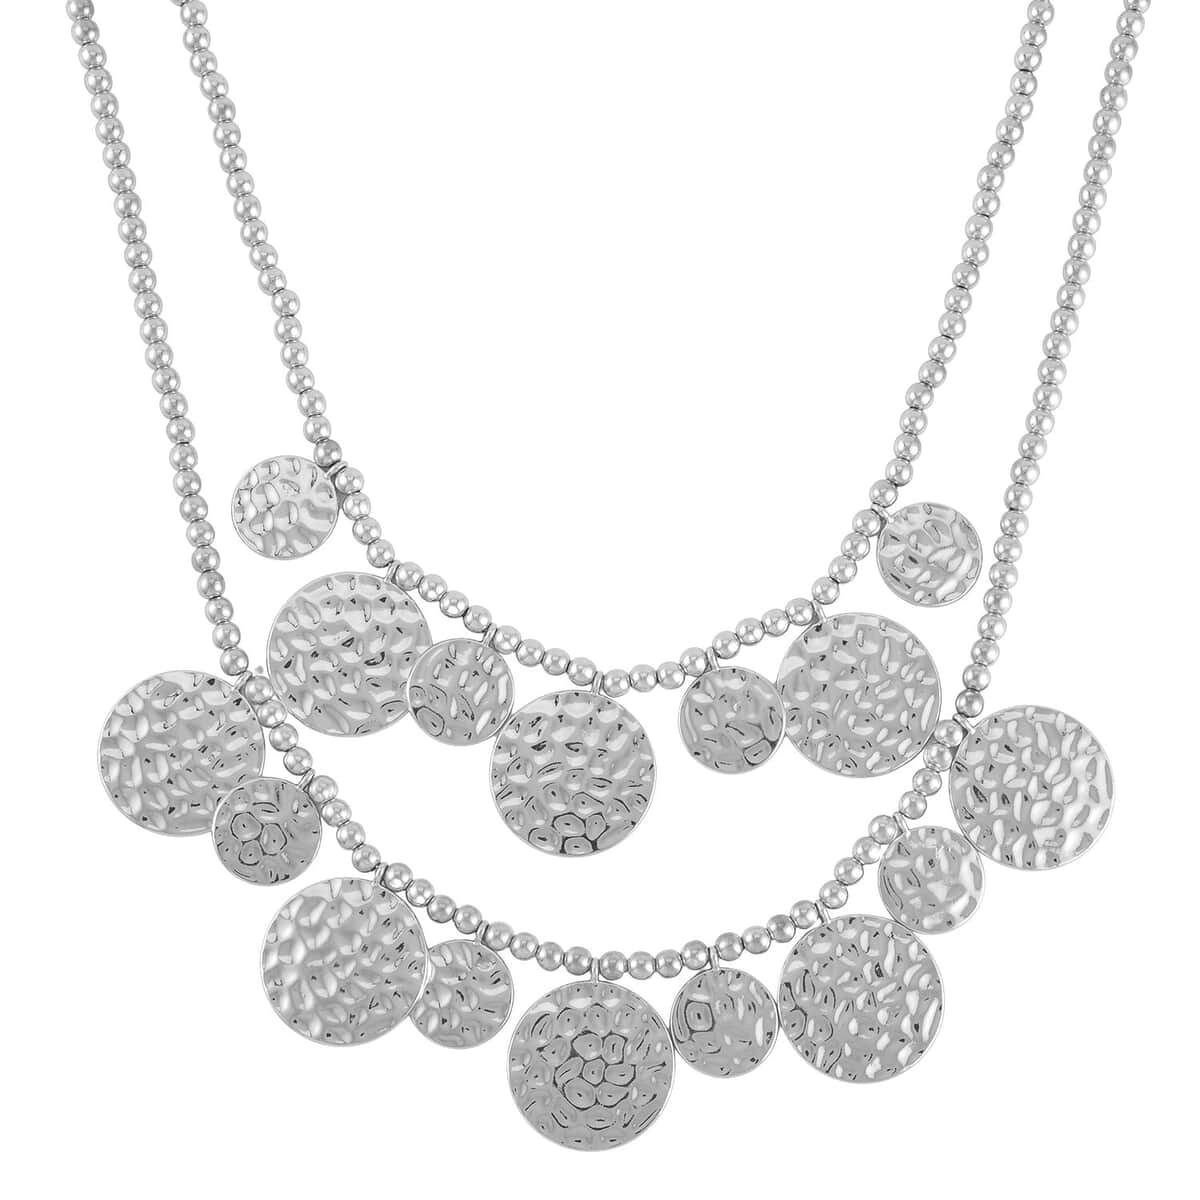 Hammer Textured Necklace 18-22 Inches and Earrings in Silvertone image number 2